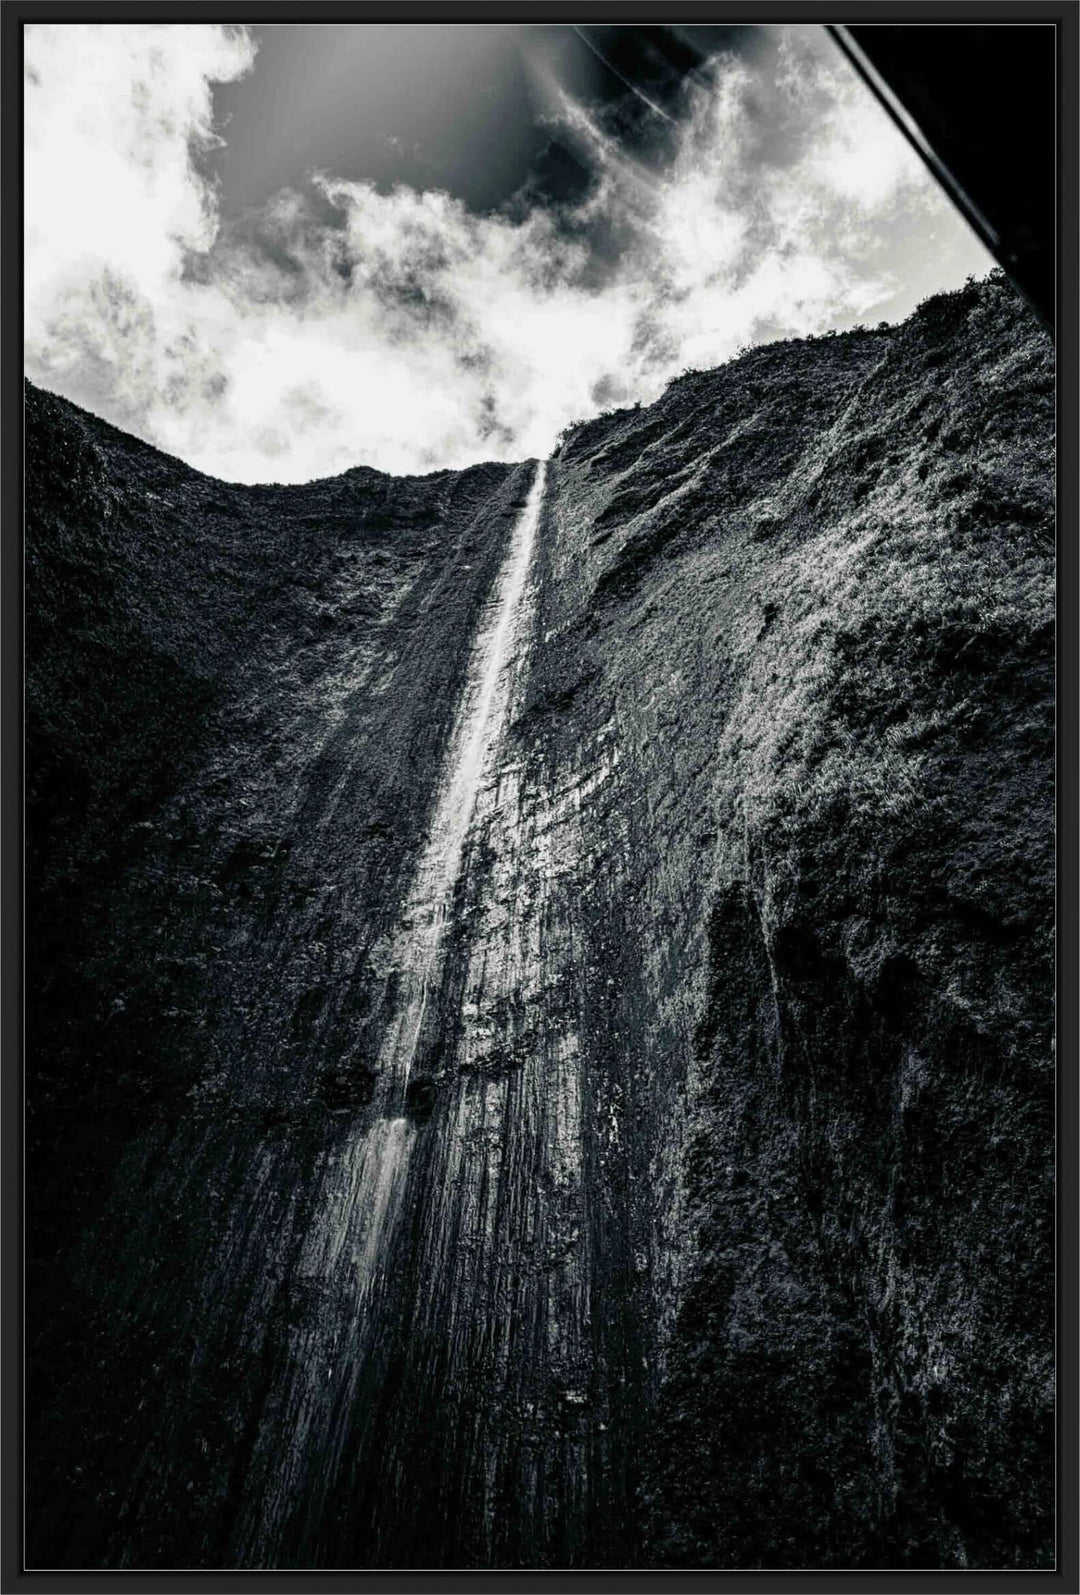 Skyward Spectacular | The Awe of Maui's Tallest Falls - Living Moments Media - Abstract, Acrylic, Artwork, Best Wall Artwork, Black & White, Canvas, Hawaii, Helicopter, Island, maui, Maui Hawaii Fine Art Photography, Maui Hawaii Wall Art, Metal, Moody, Mountains, new arrivals, New Moments, open-edition, Prints, rocks, size-16-x-24, size-24-x-36, size-40-x-60, vertical, Visual Artwork, Water, Waterfalls, White